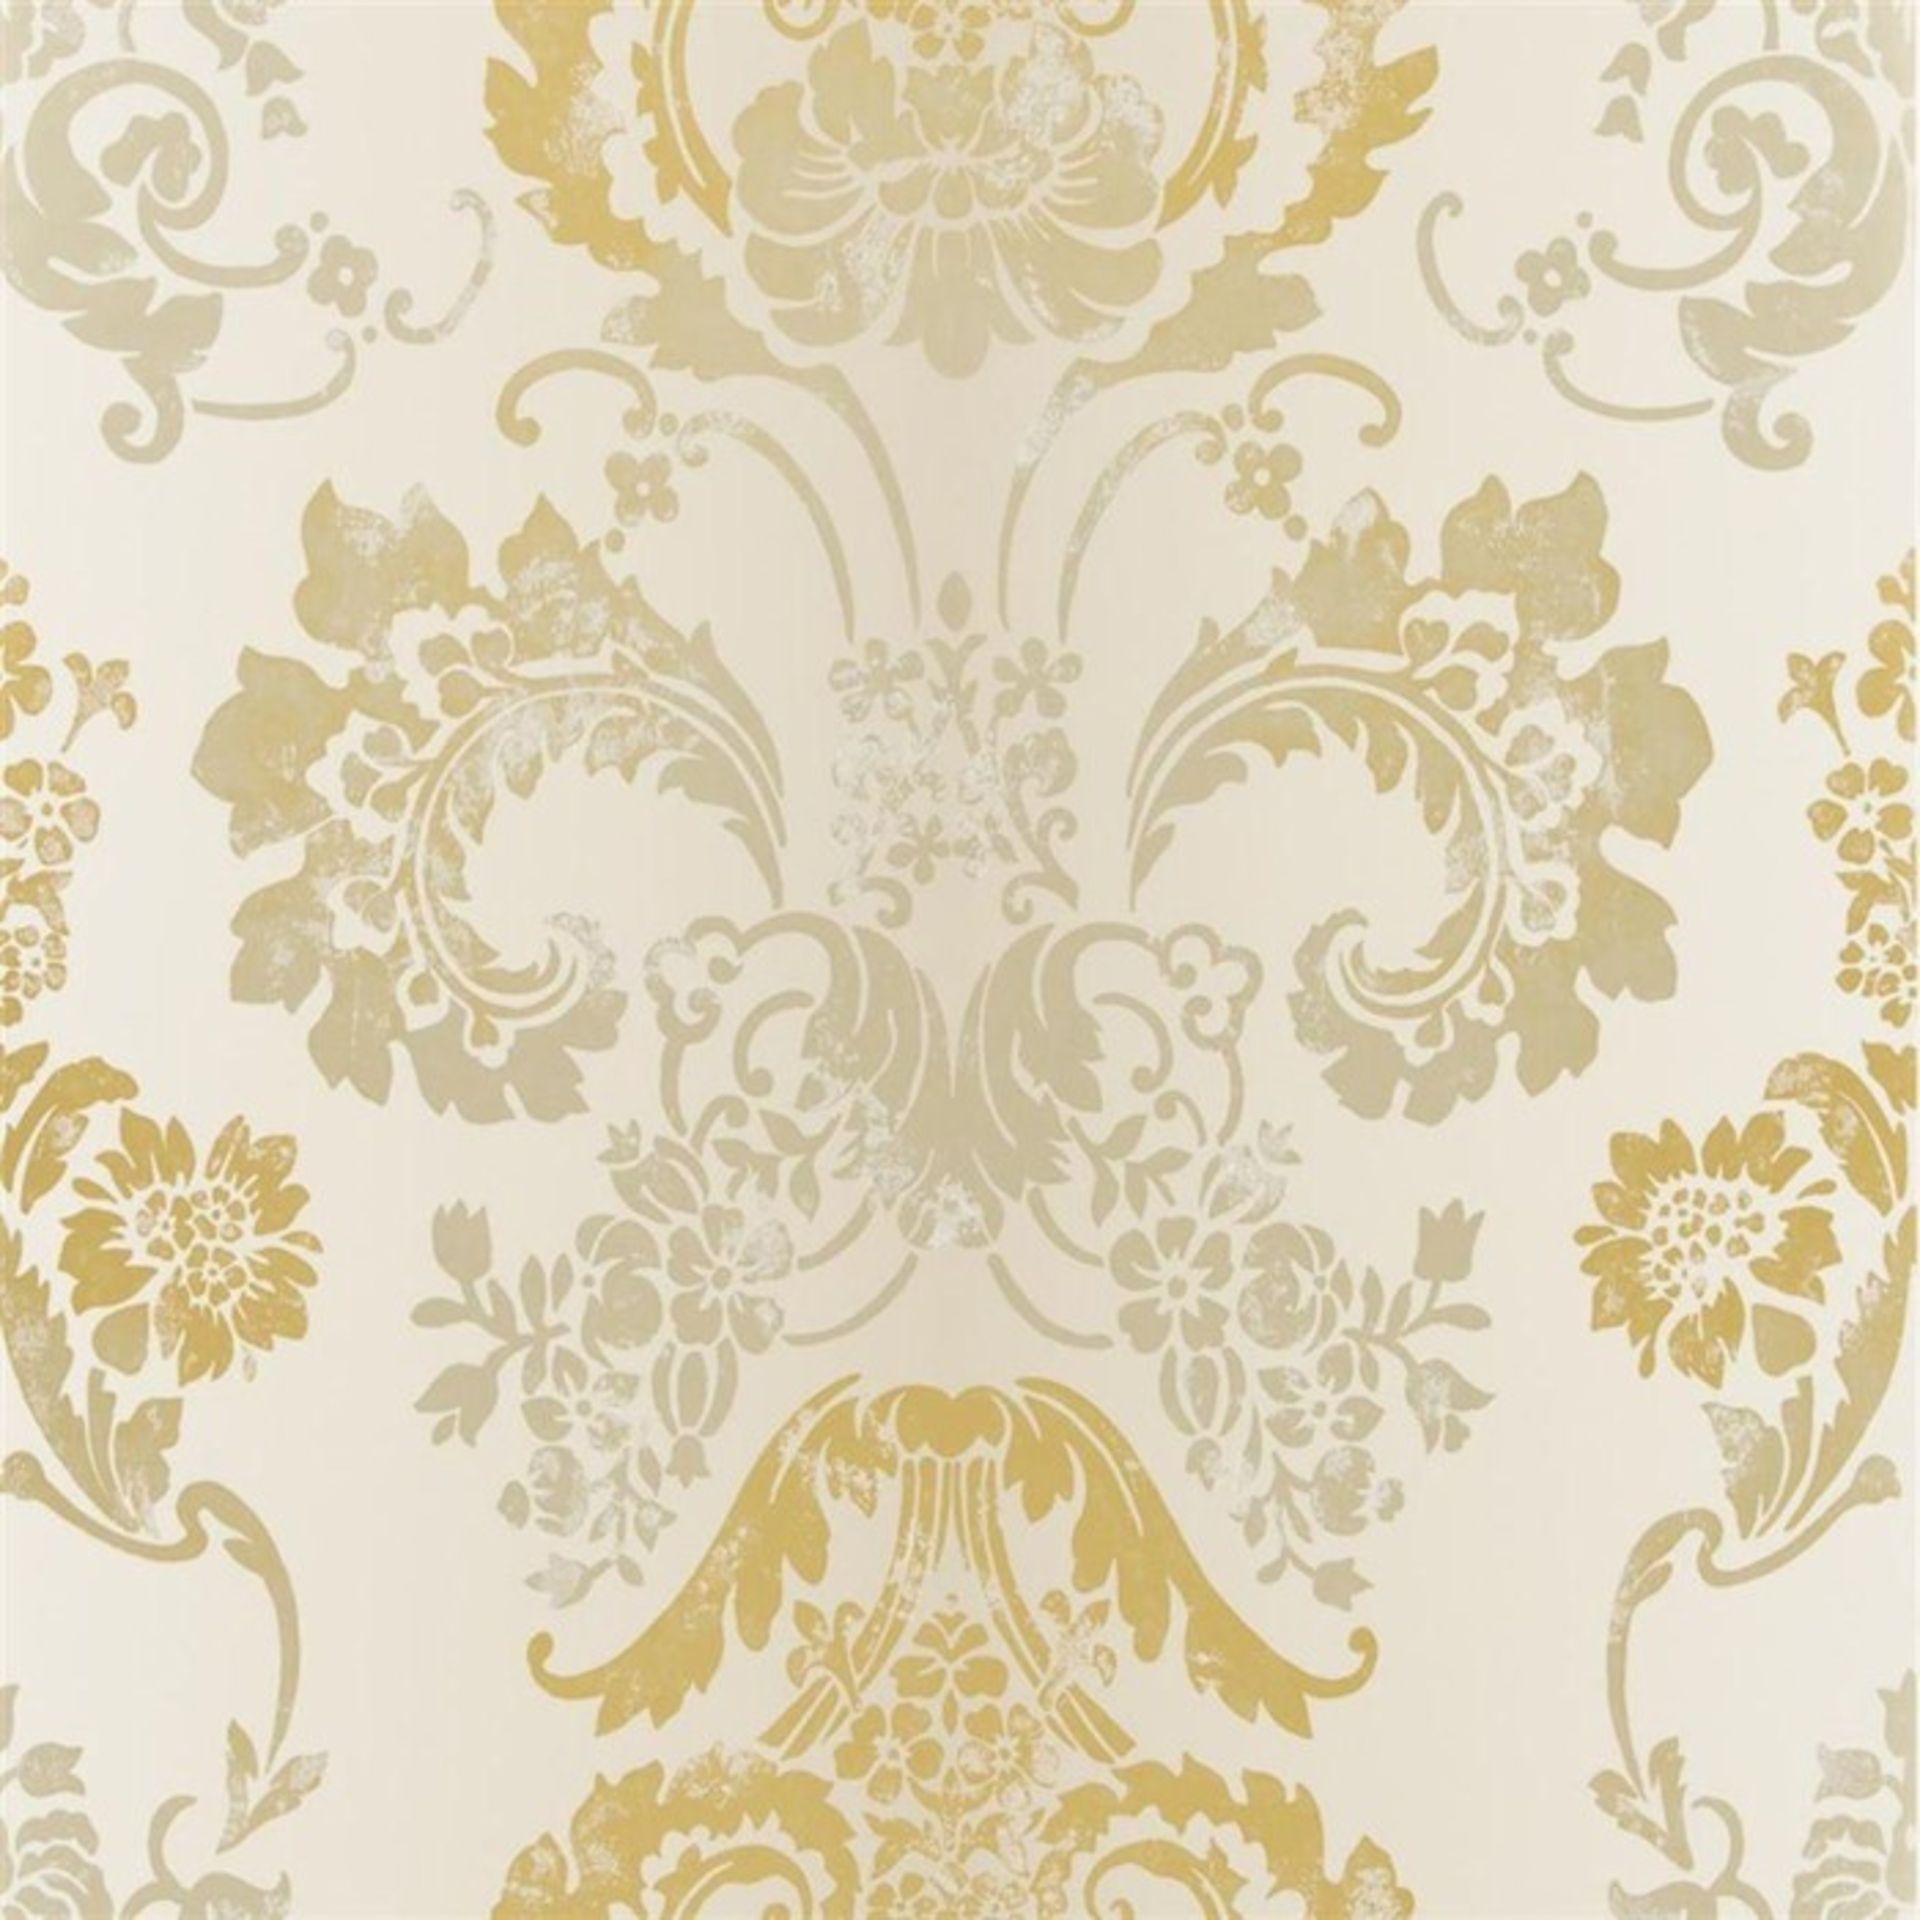 1 ROLL DESIGNERS GUILD WALLCOVERING - KASHGAR P619/03 / RRP £65.00 (PUBLIC VIEWING AVAILABLE)